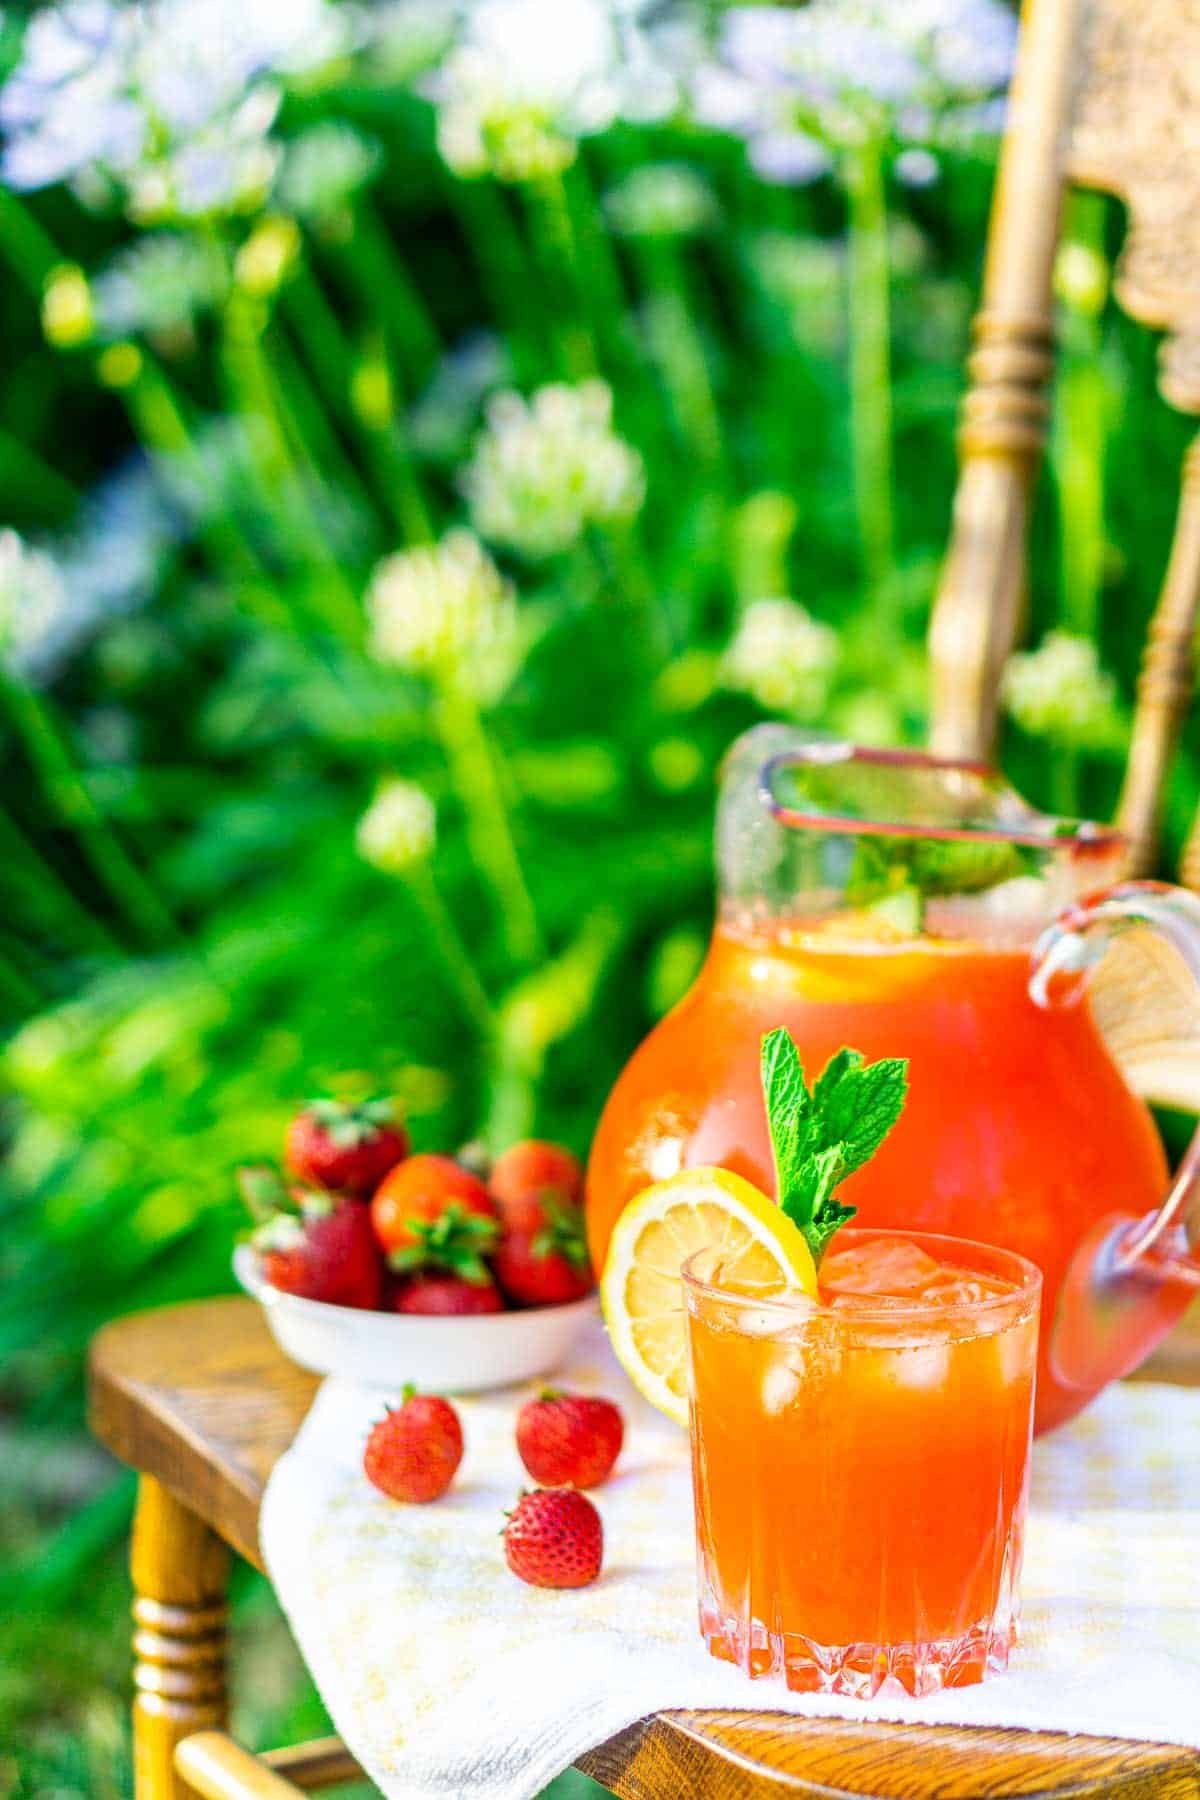 A glass of strawberrry-mint lemonade on a chair in a garden with a pitcher behind it.